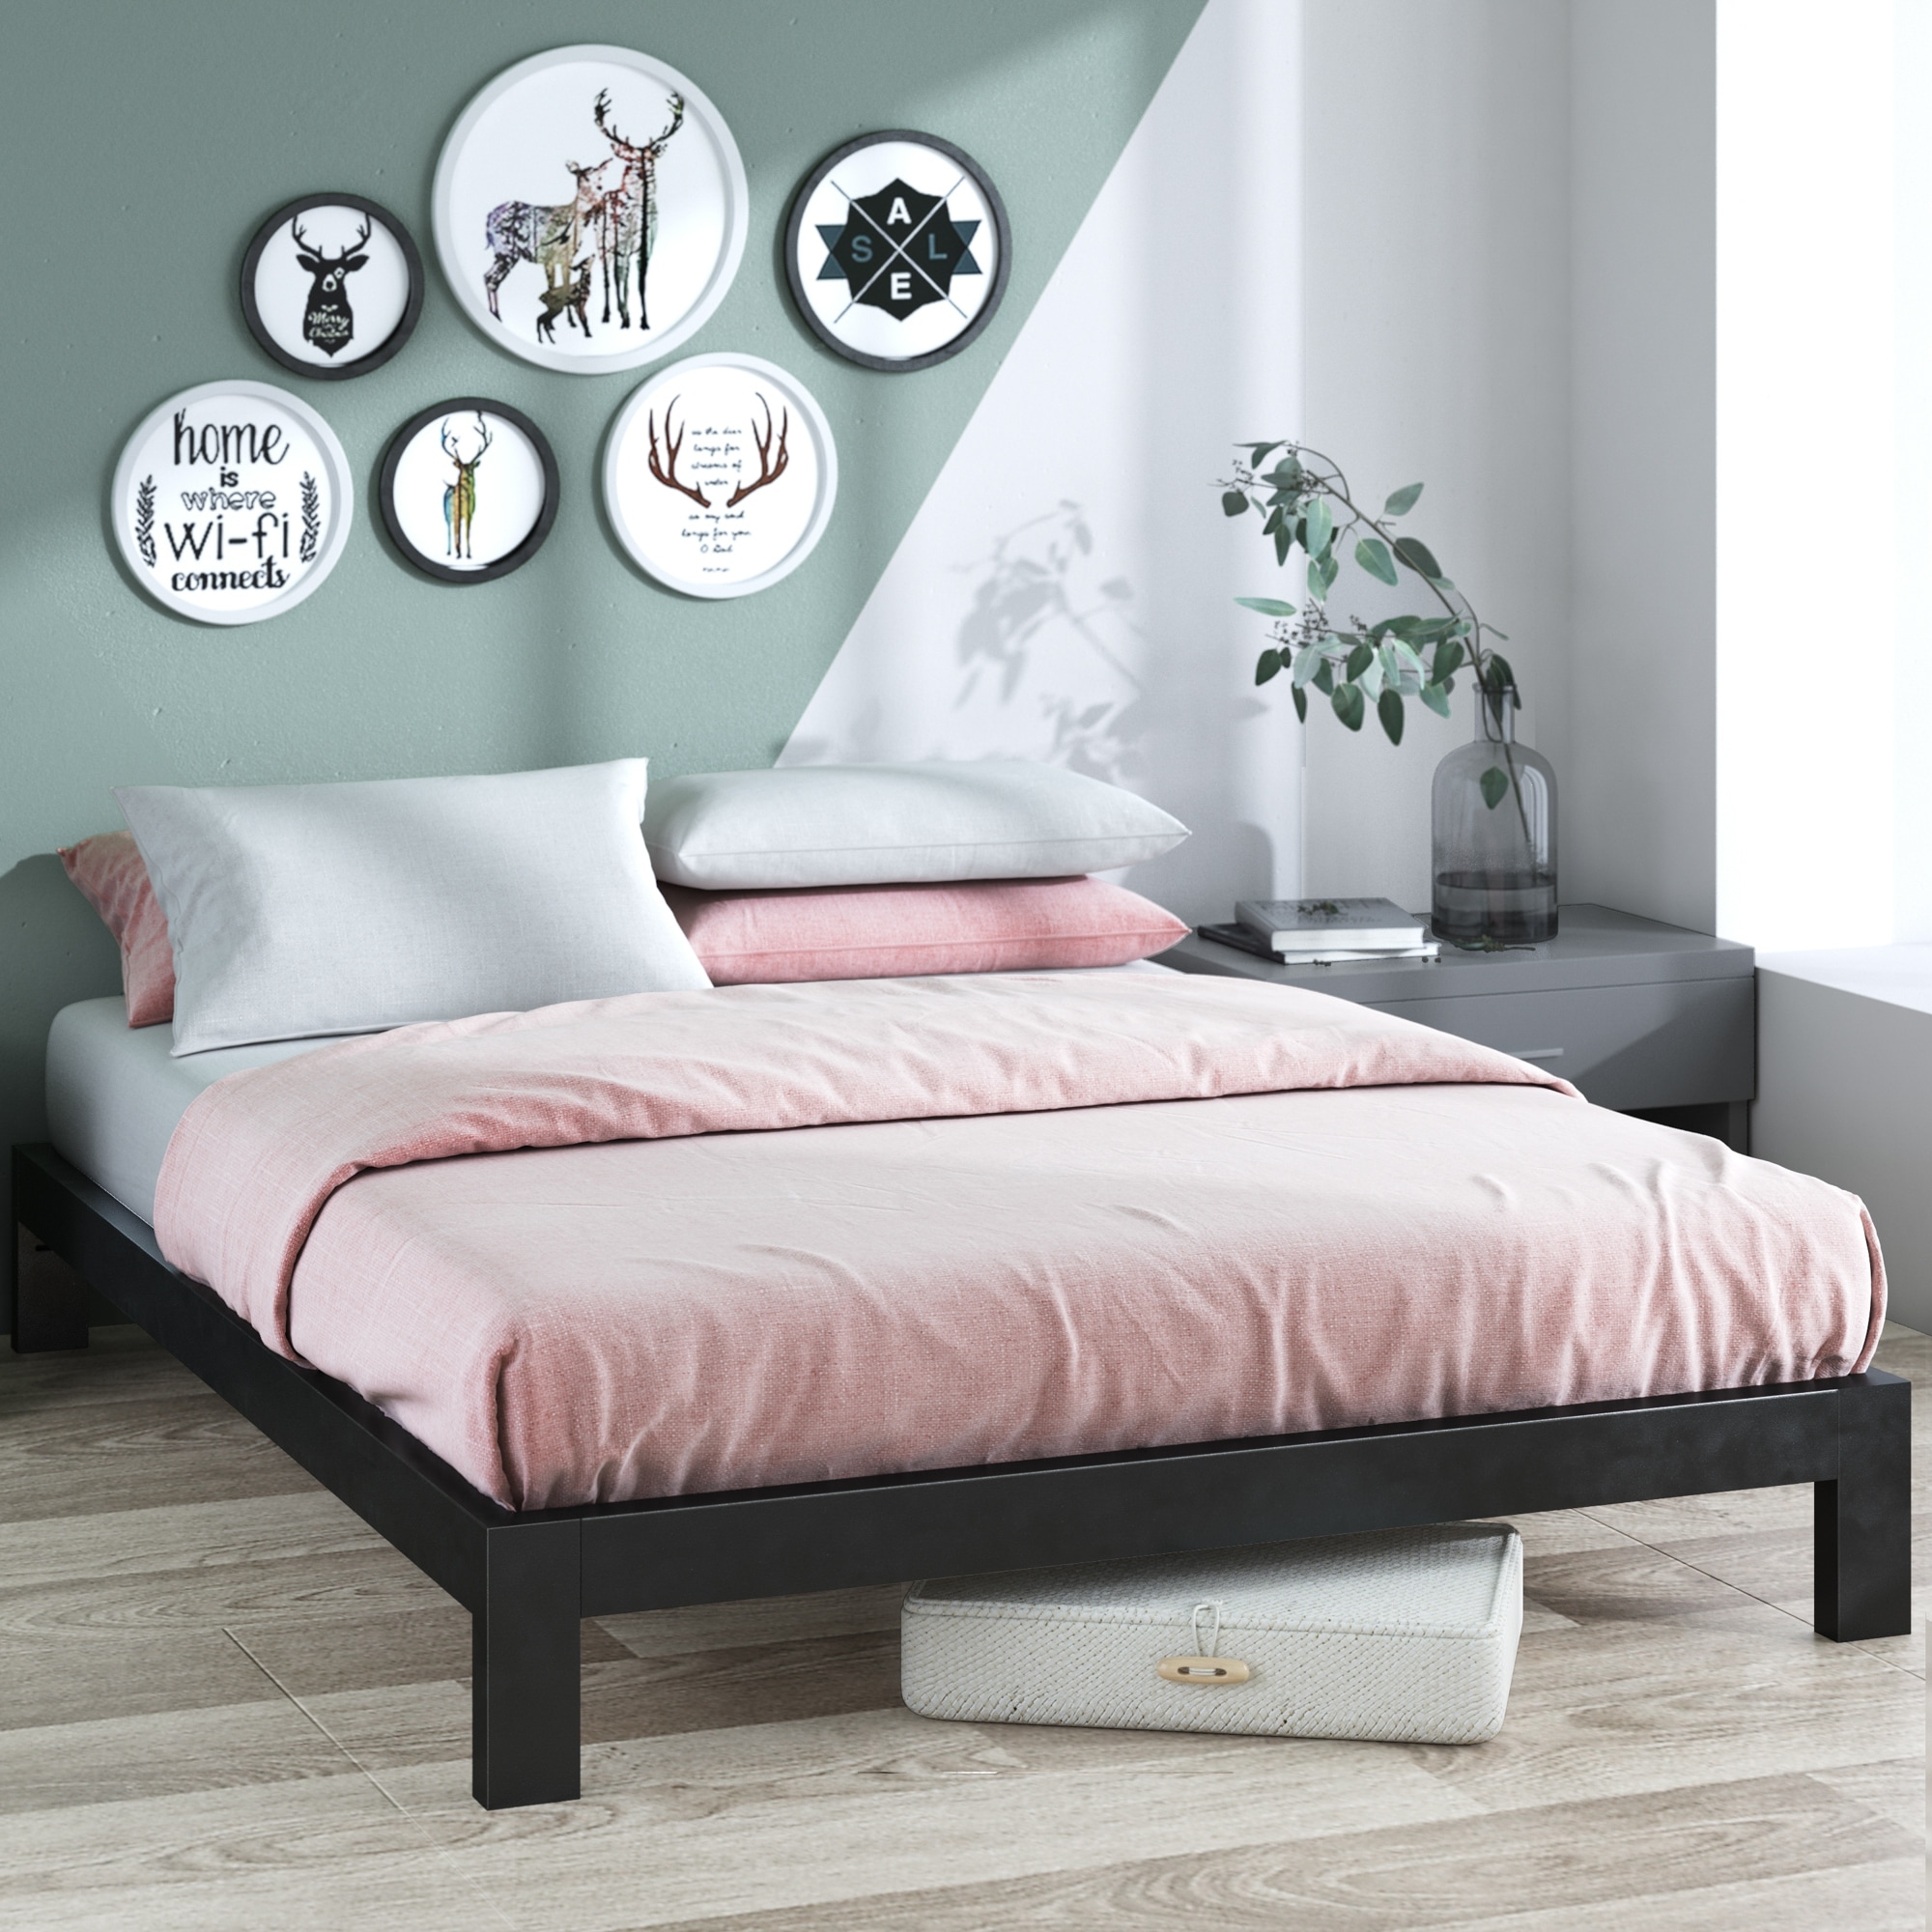 Is This the Perfect Bed Frame for Your Bedroom Makeover. Zinus Taylan Metal and Wood Platform Bed Review